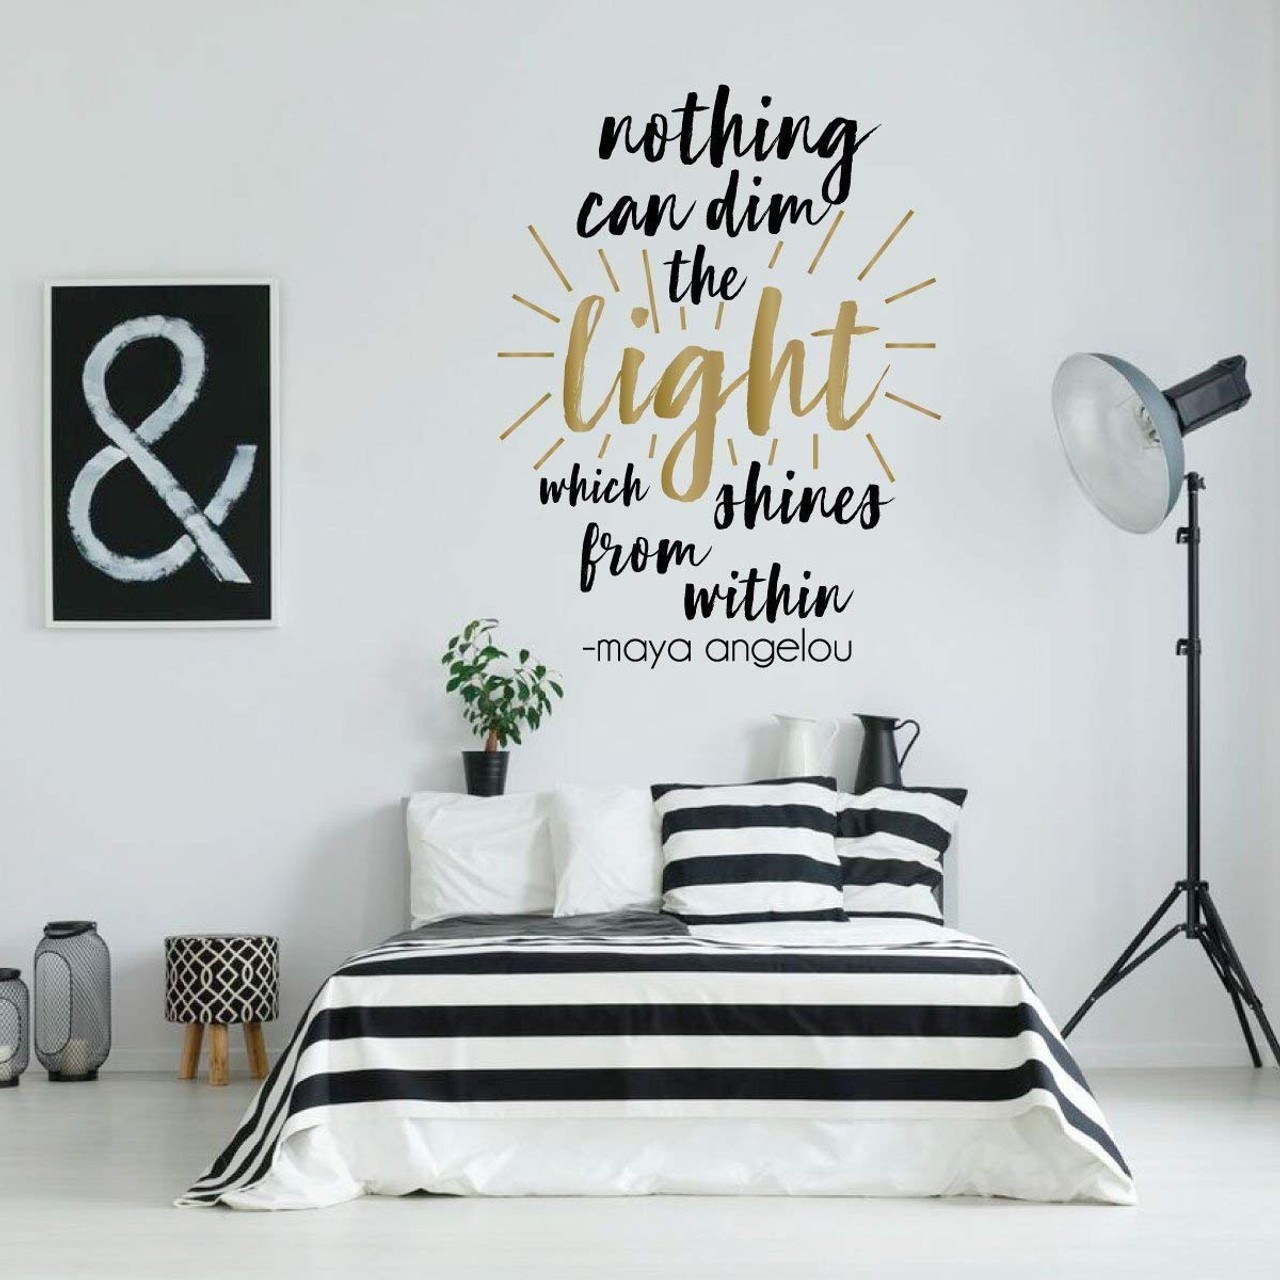 Decals Stickers Light Dimming Light Dimming Stickers For